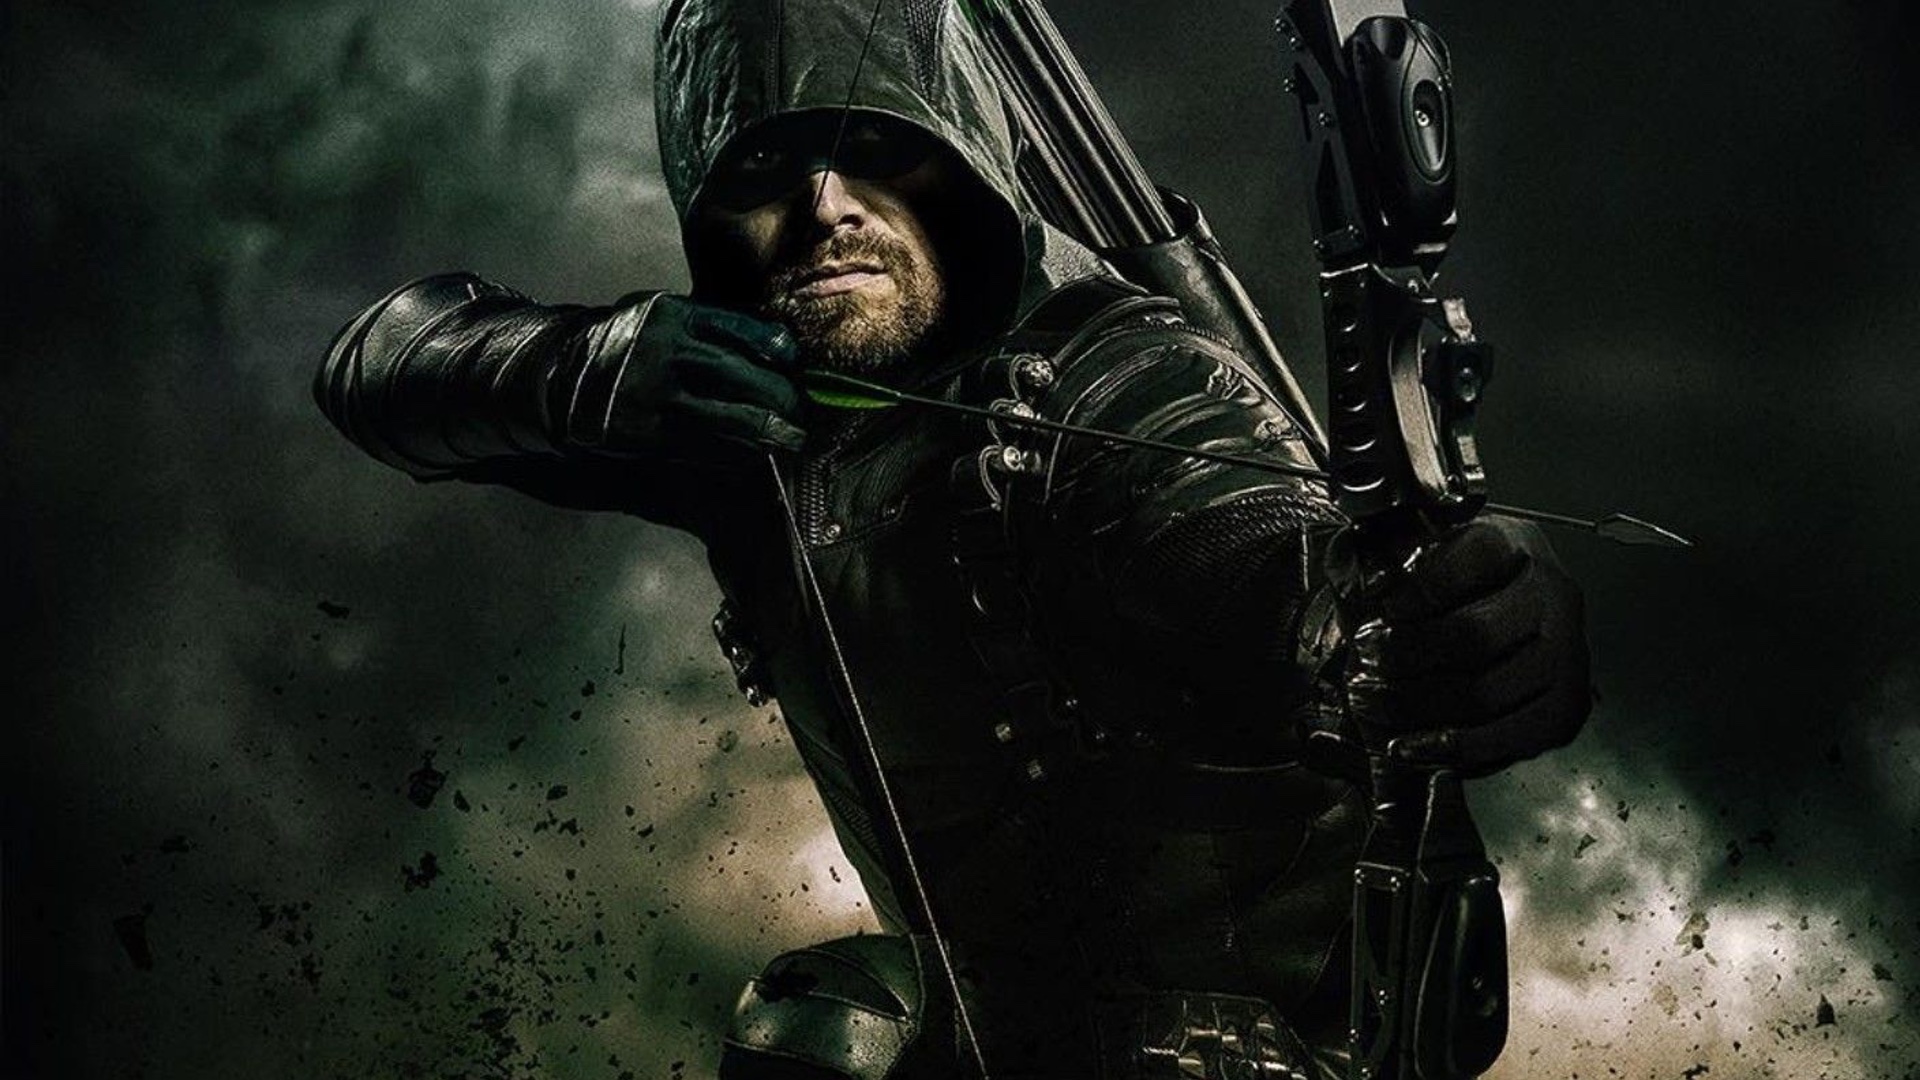 A Vigilante is Impersonating The Green Arrow in New Trailer For